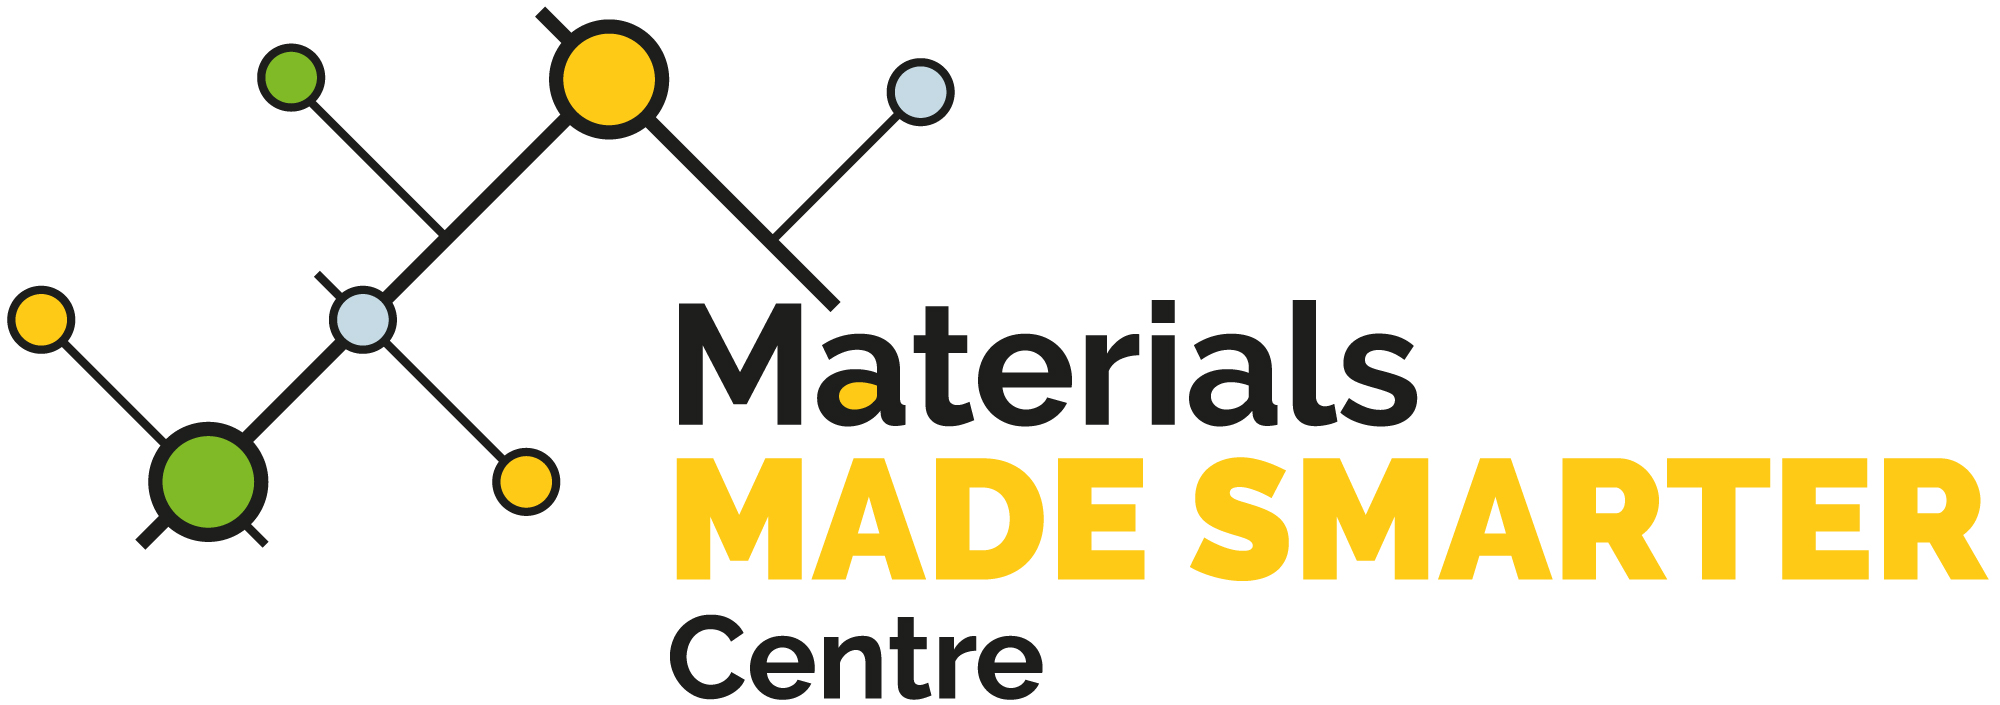 New centre will bring together leading researchers in materials, advanced manufacturing, modelling, physical computing, psychology and management across the whole materials manufacturing value chain. (cover image)